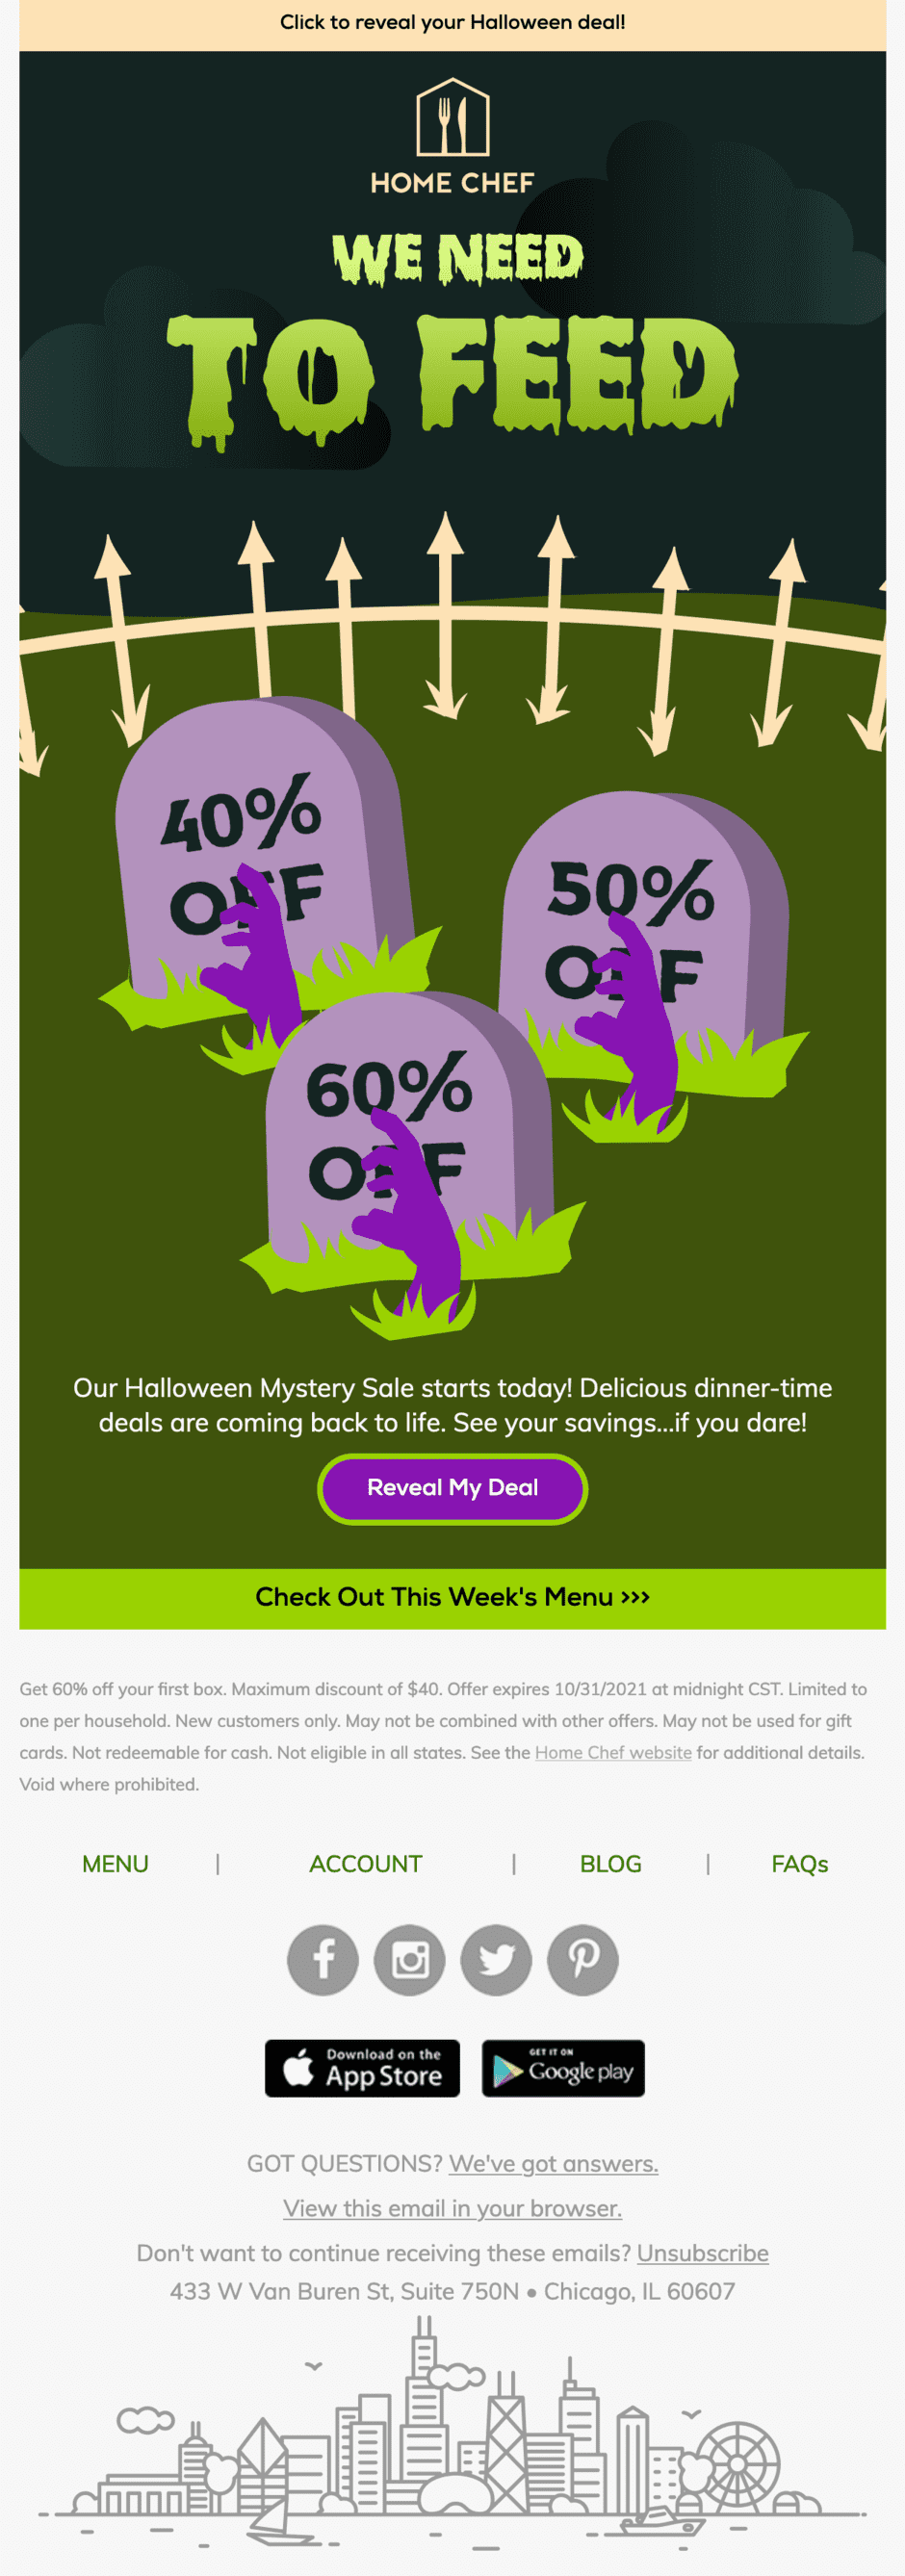 A Halloween email with a green and purple color scheme